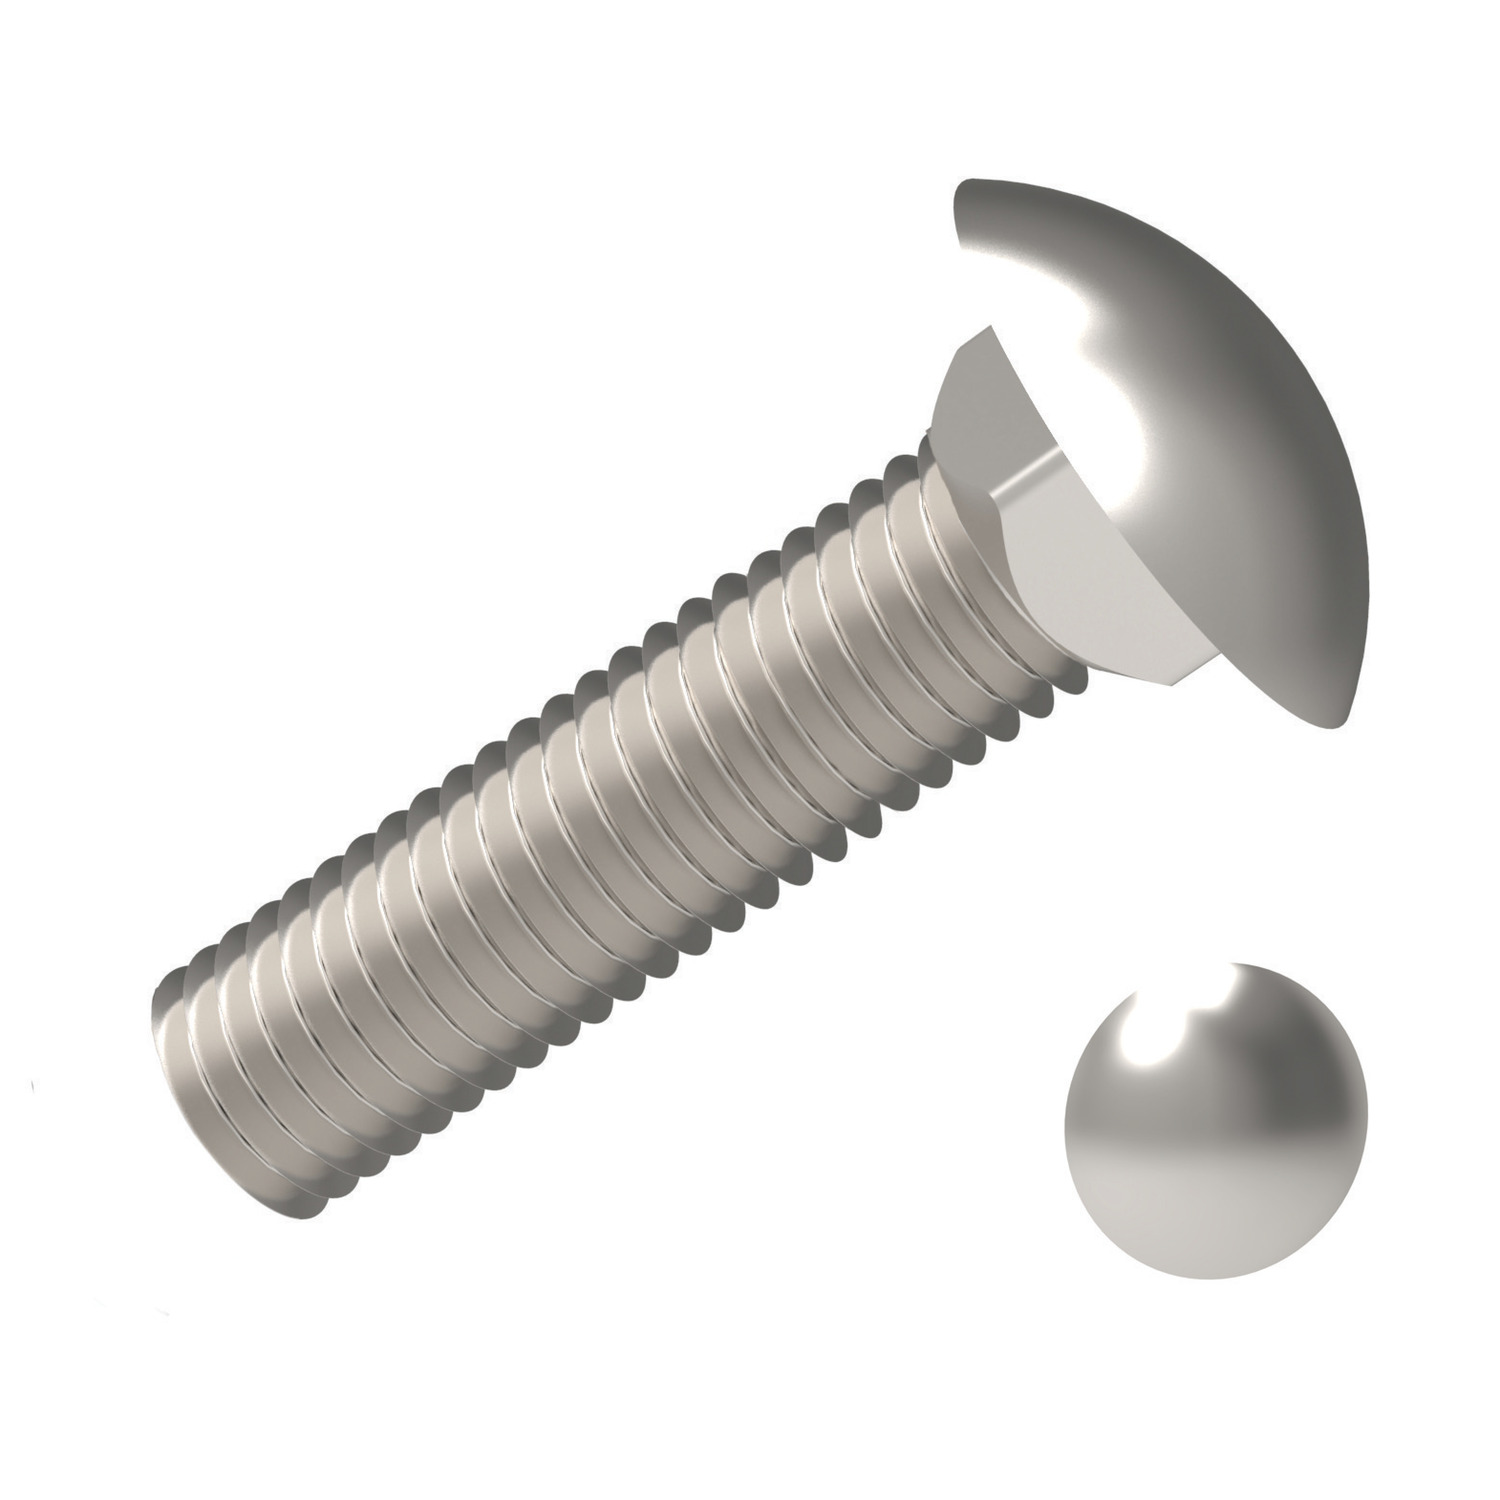 Carriage Bolts - Full Thread Carriage bolts made from A2 stainless steel. Sizes range from M5 to M16. Manufactured to DIN 603. Full Thread.